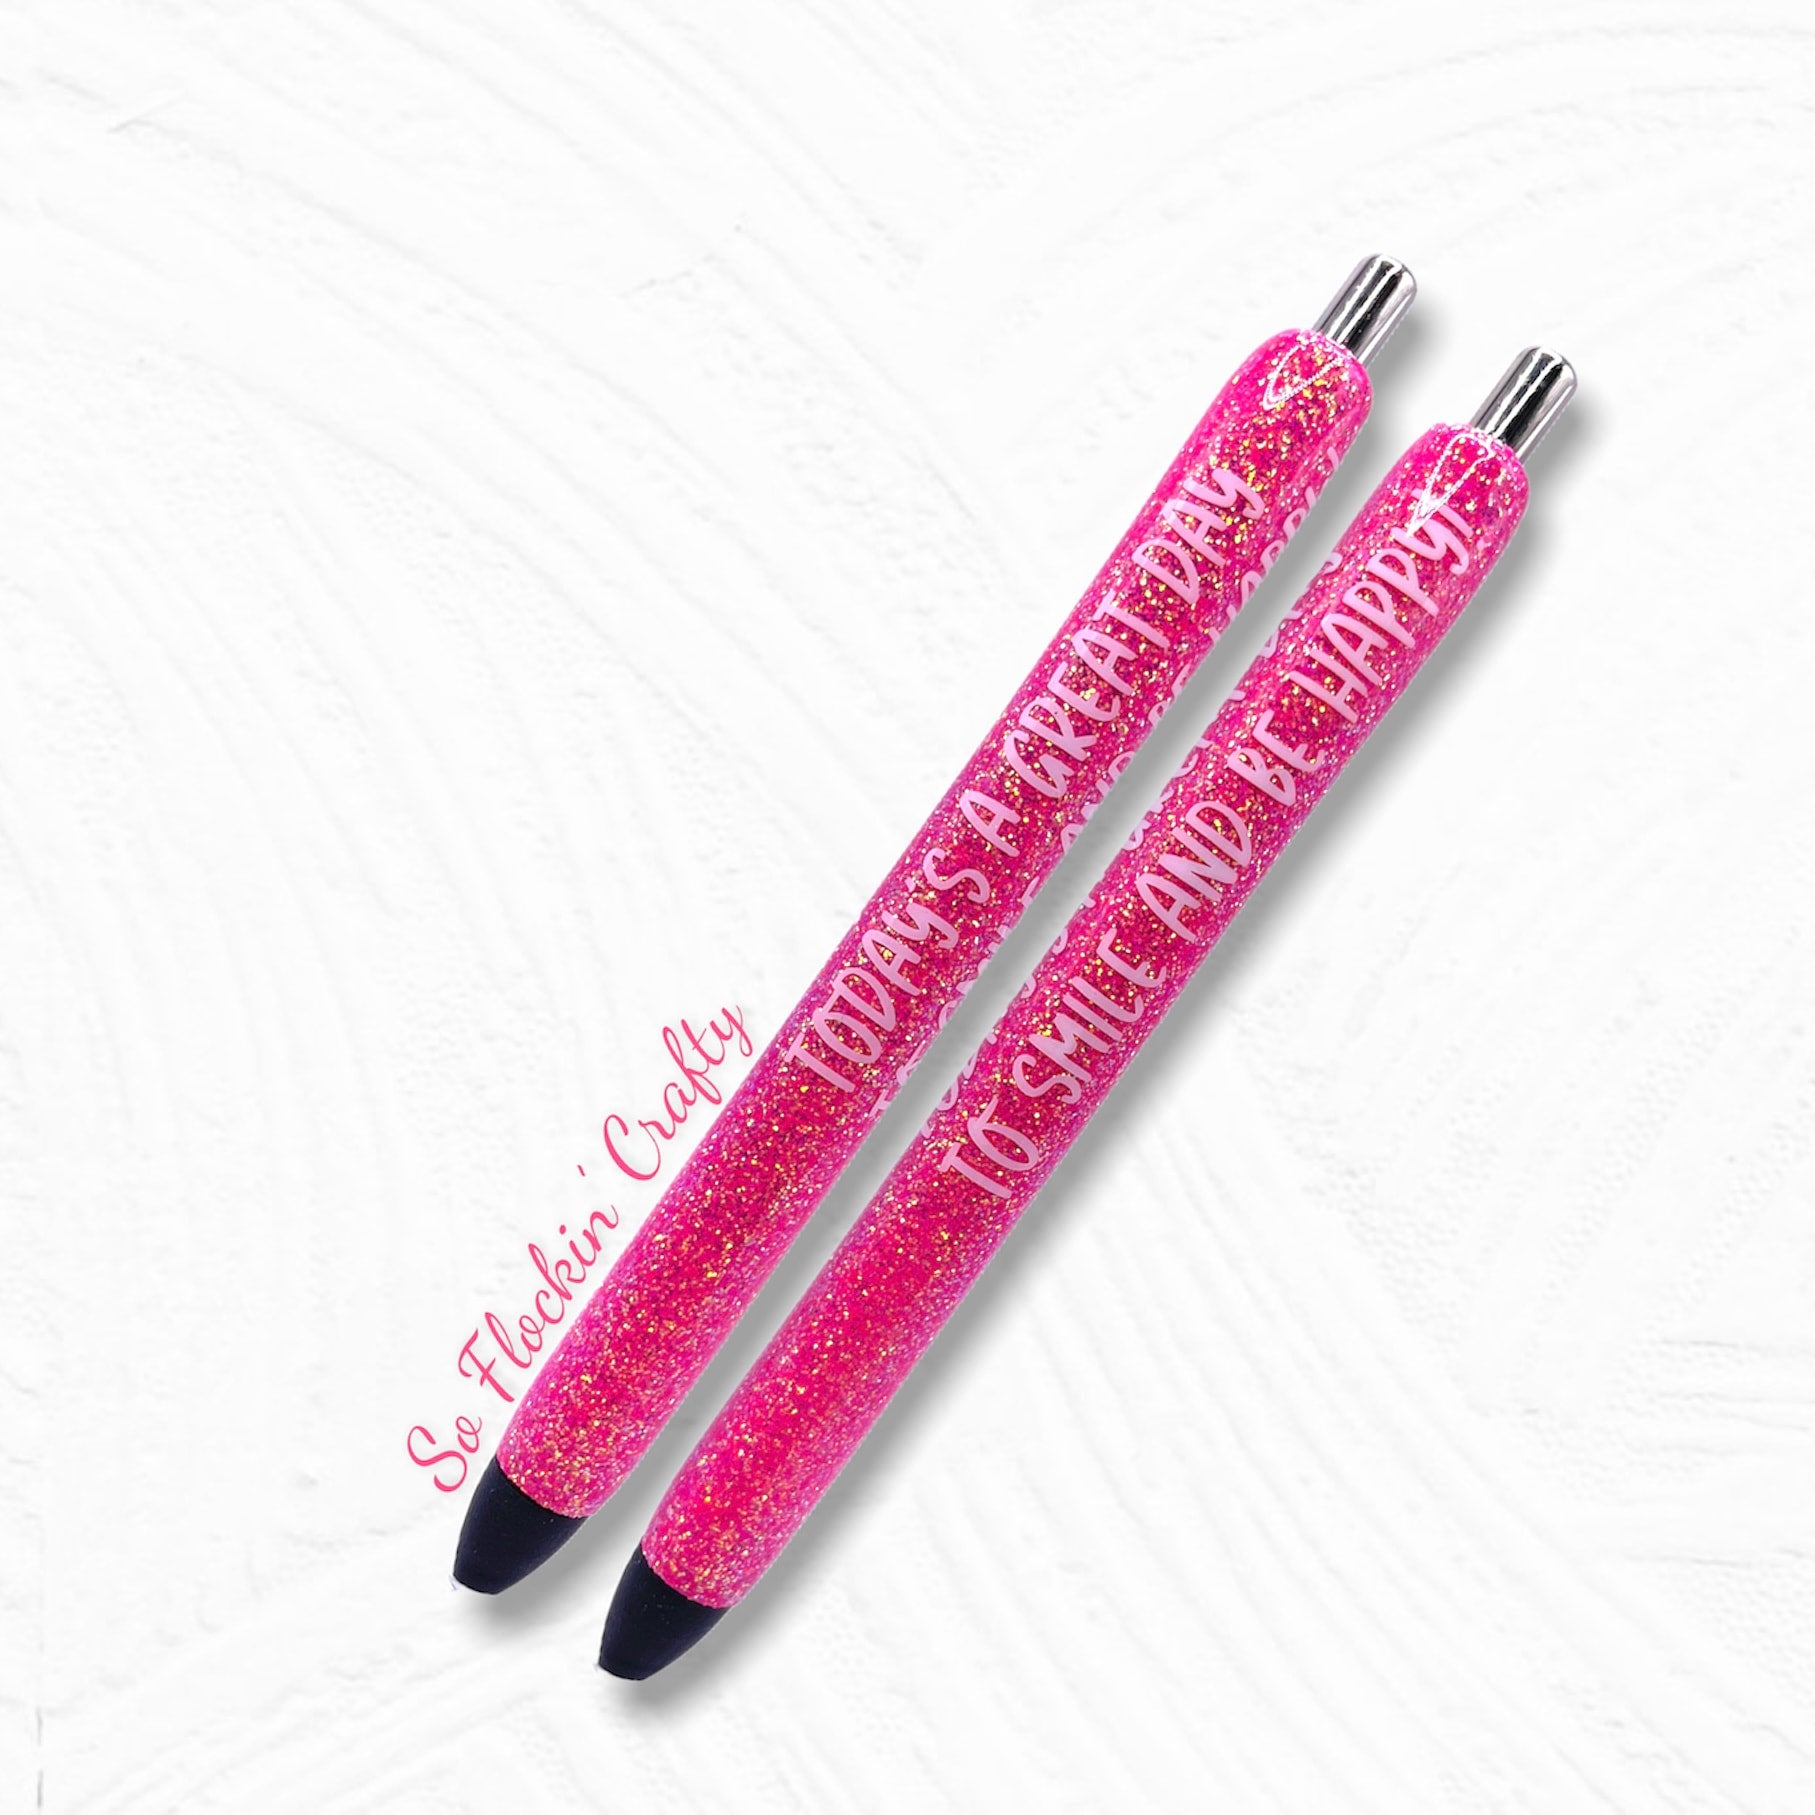 Days of the Week Glitter Pens | Naughty Pens | Funny Glitter Pens | Adult  Sassy Pen | Days of the Week Gel Pen | Personalized Glittered Pens